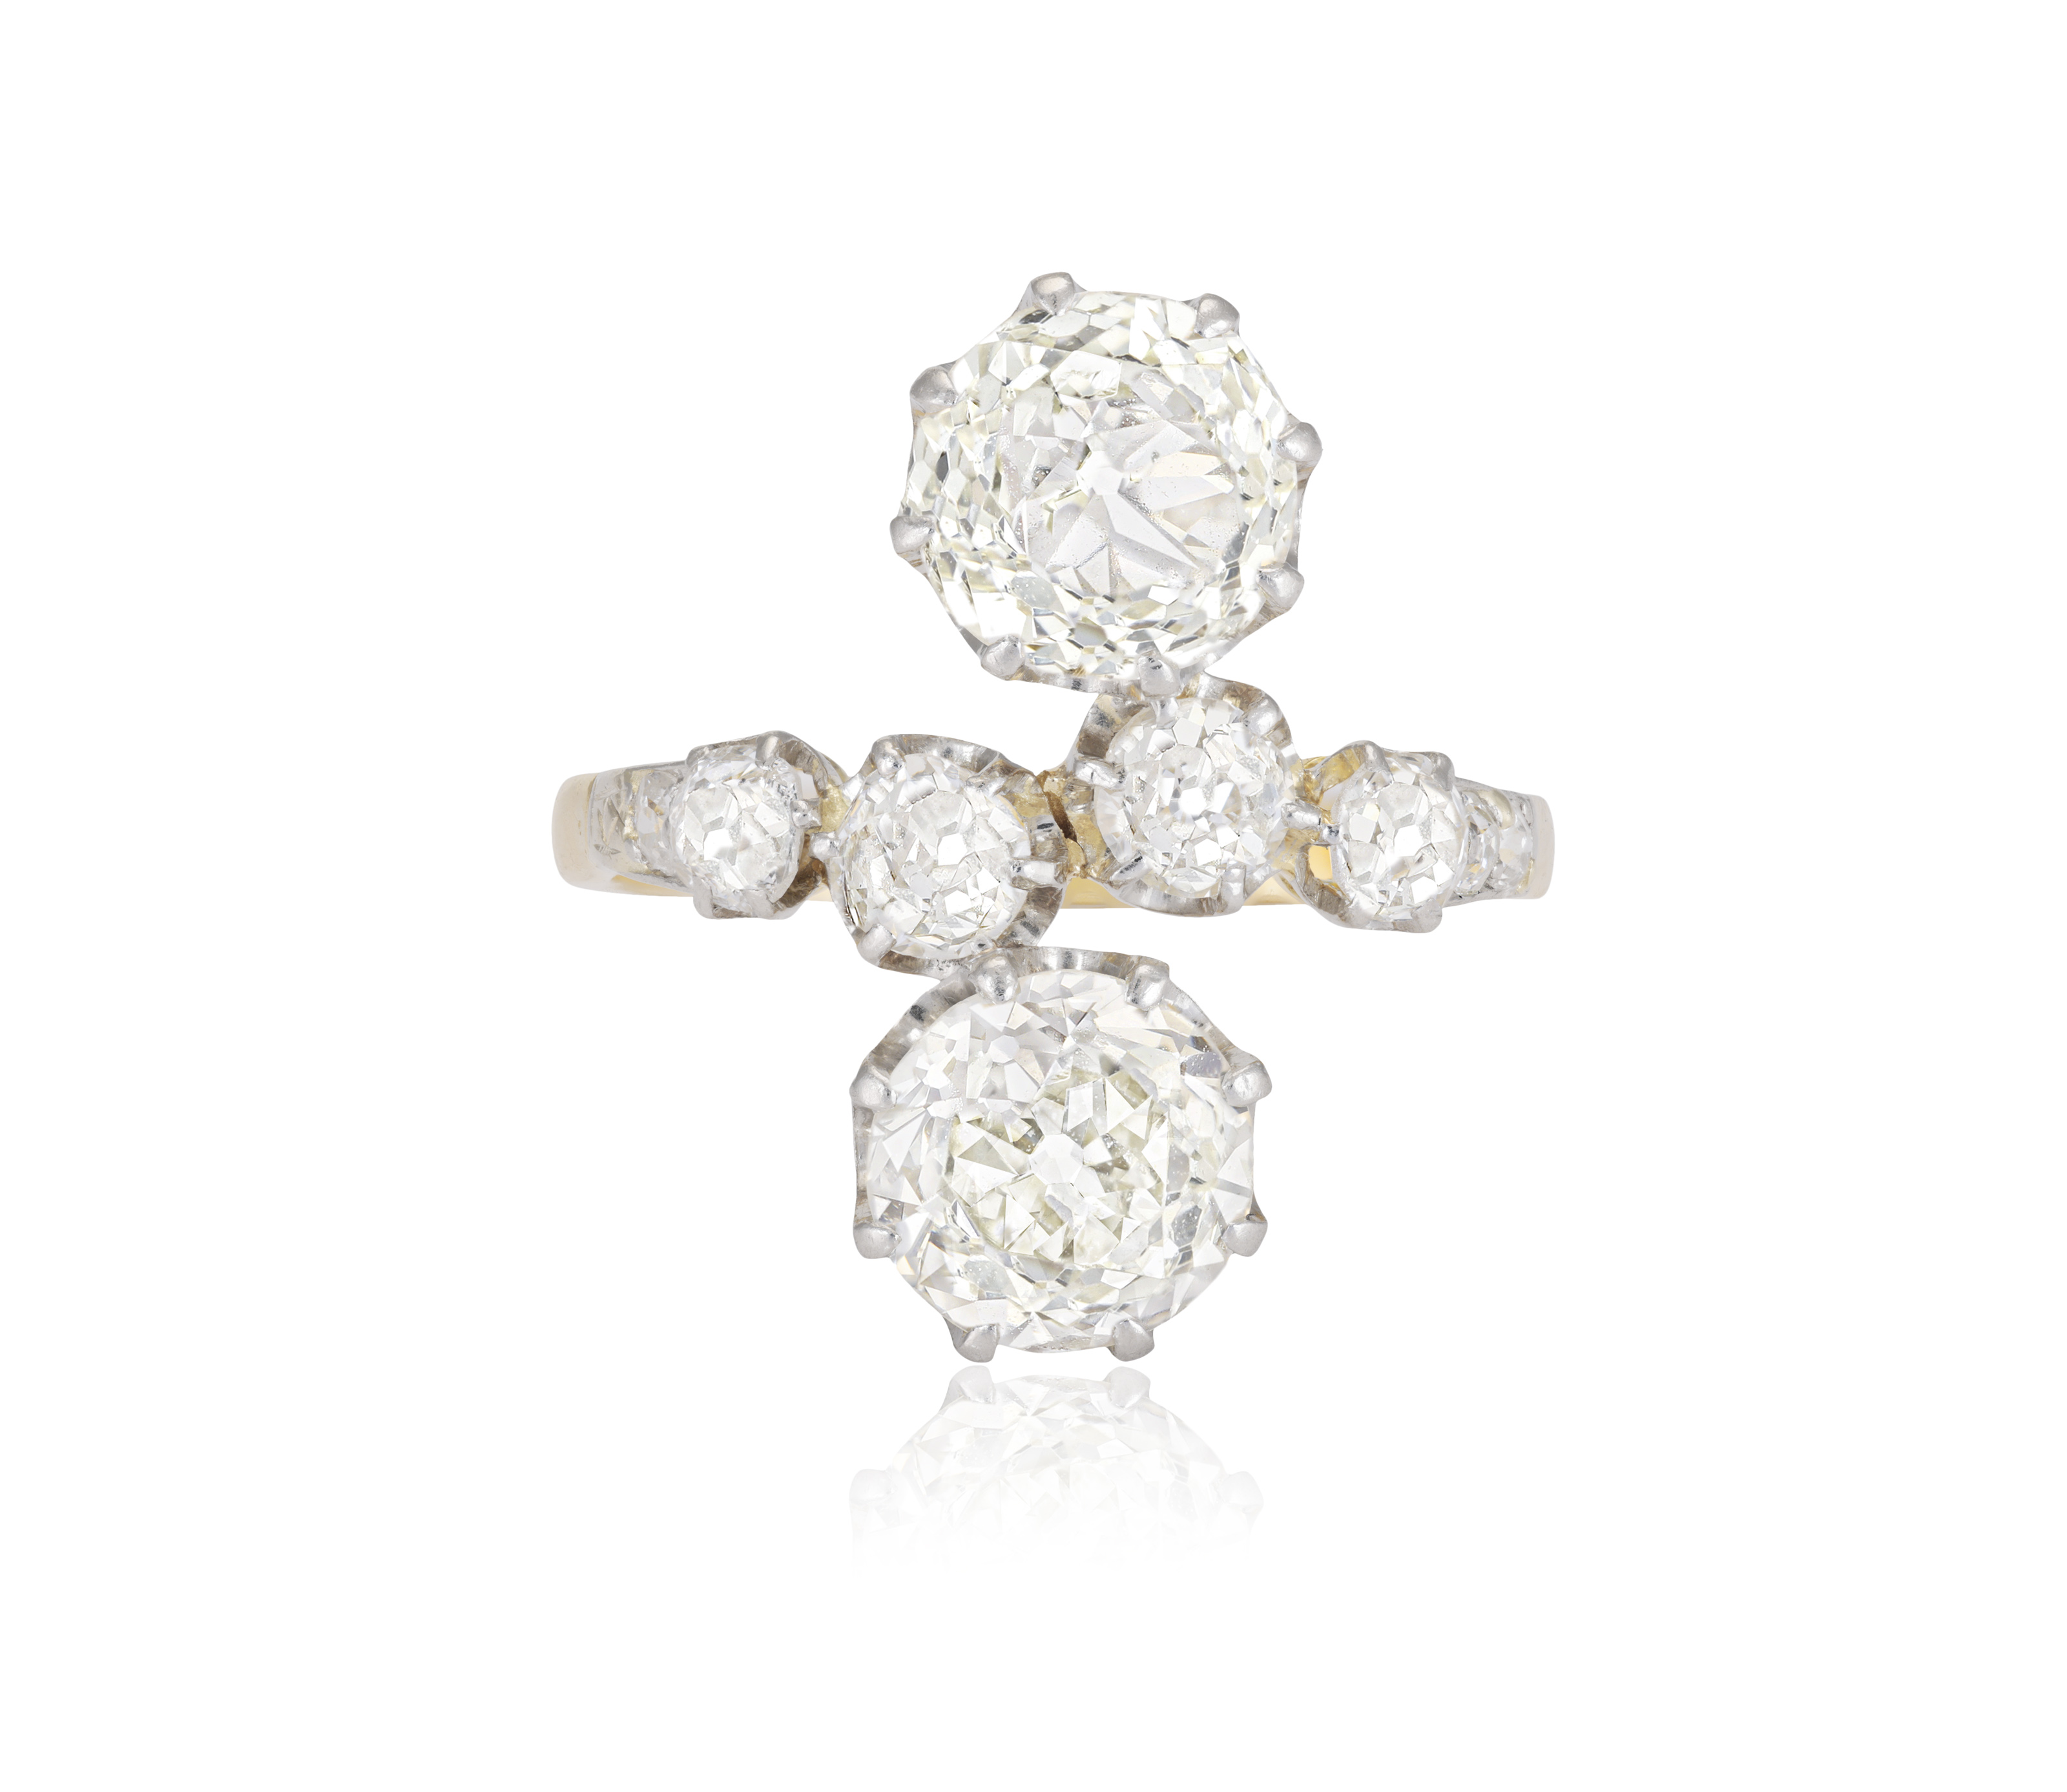 AN EARLY 20TH CENTURY 'TOI ET MOI' DIAMOND DRESS RING Composed of two old-cut diamonds weighing